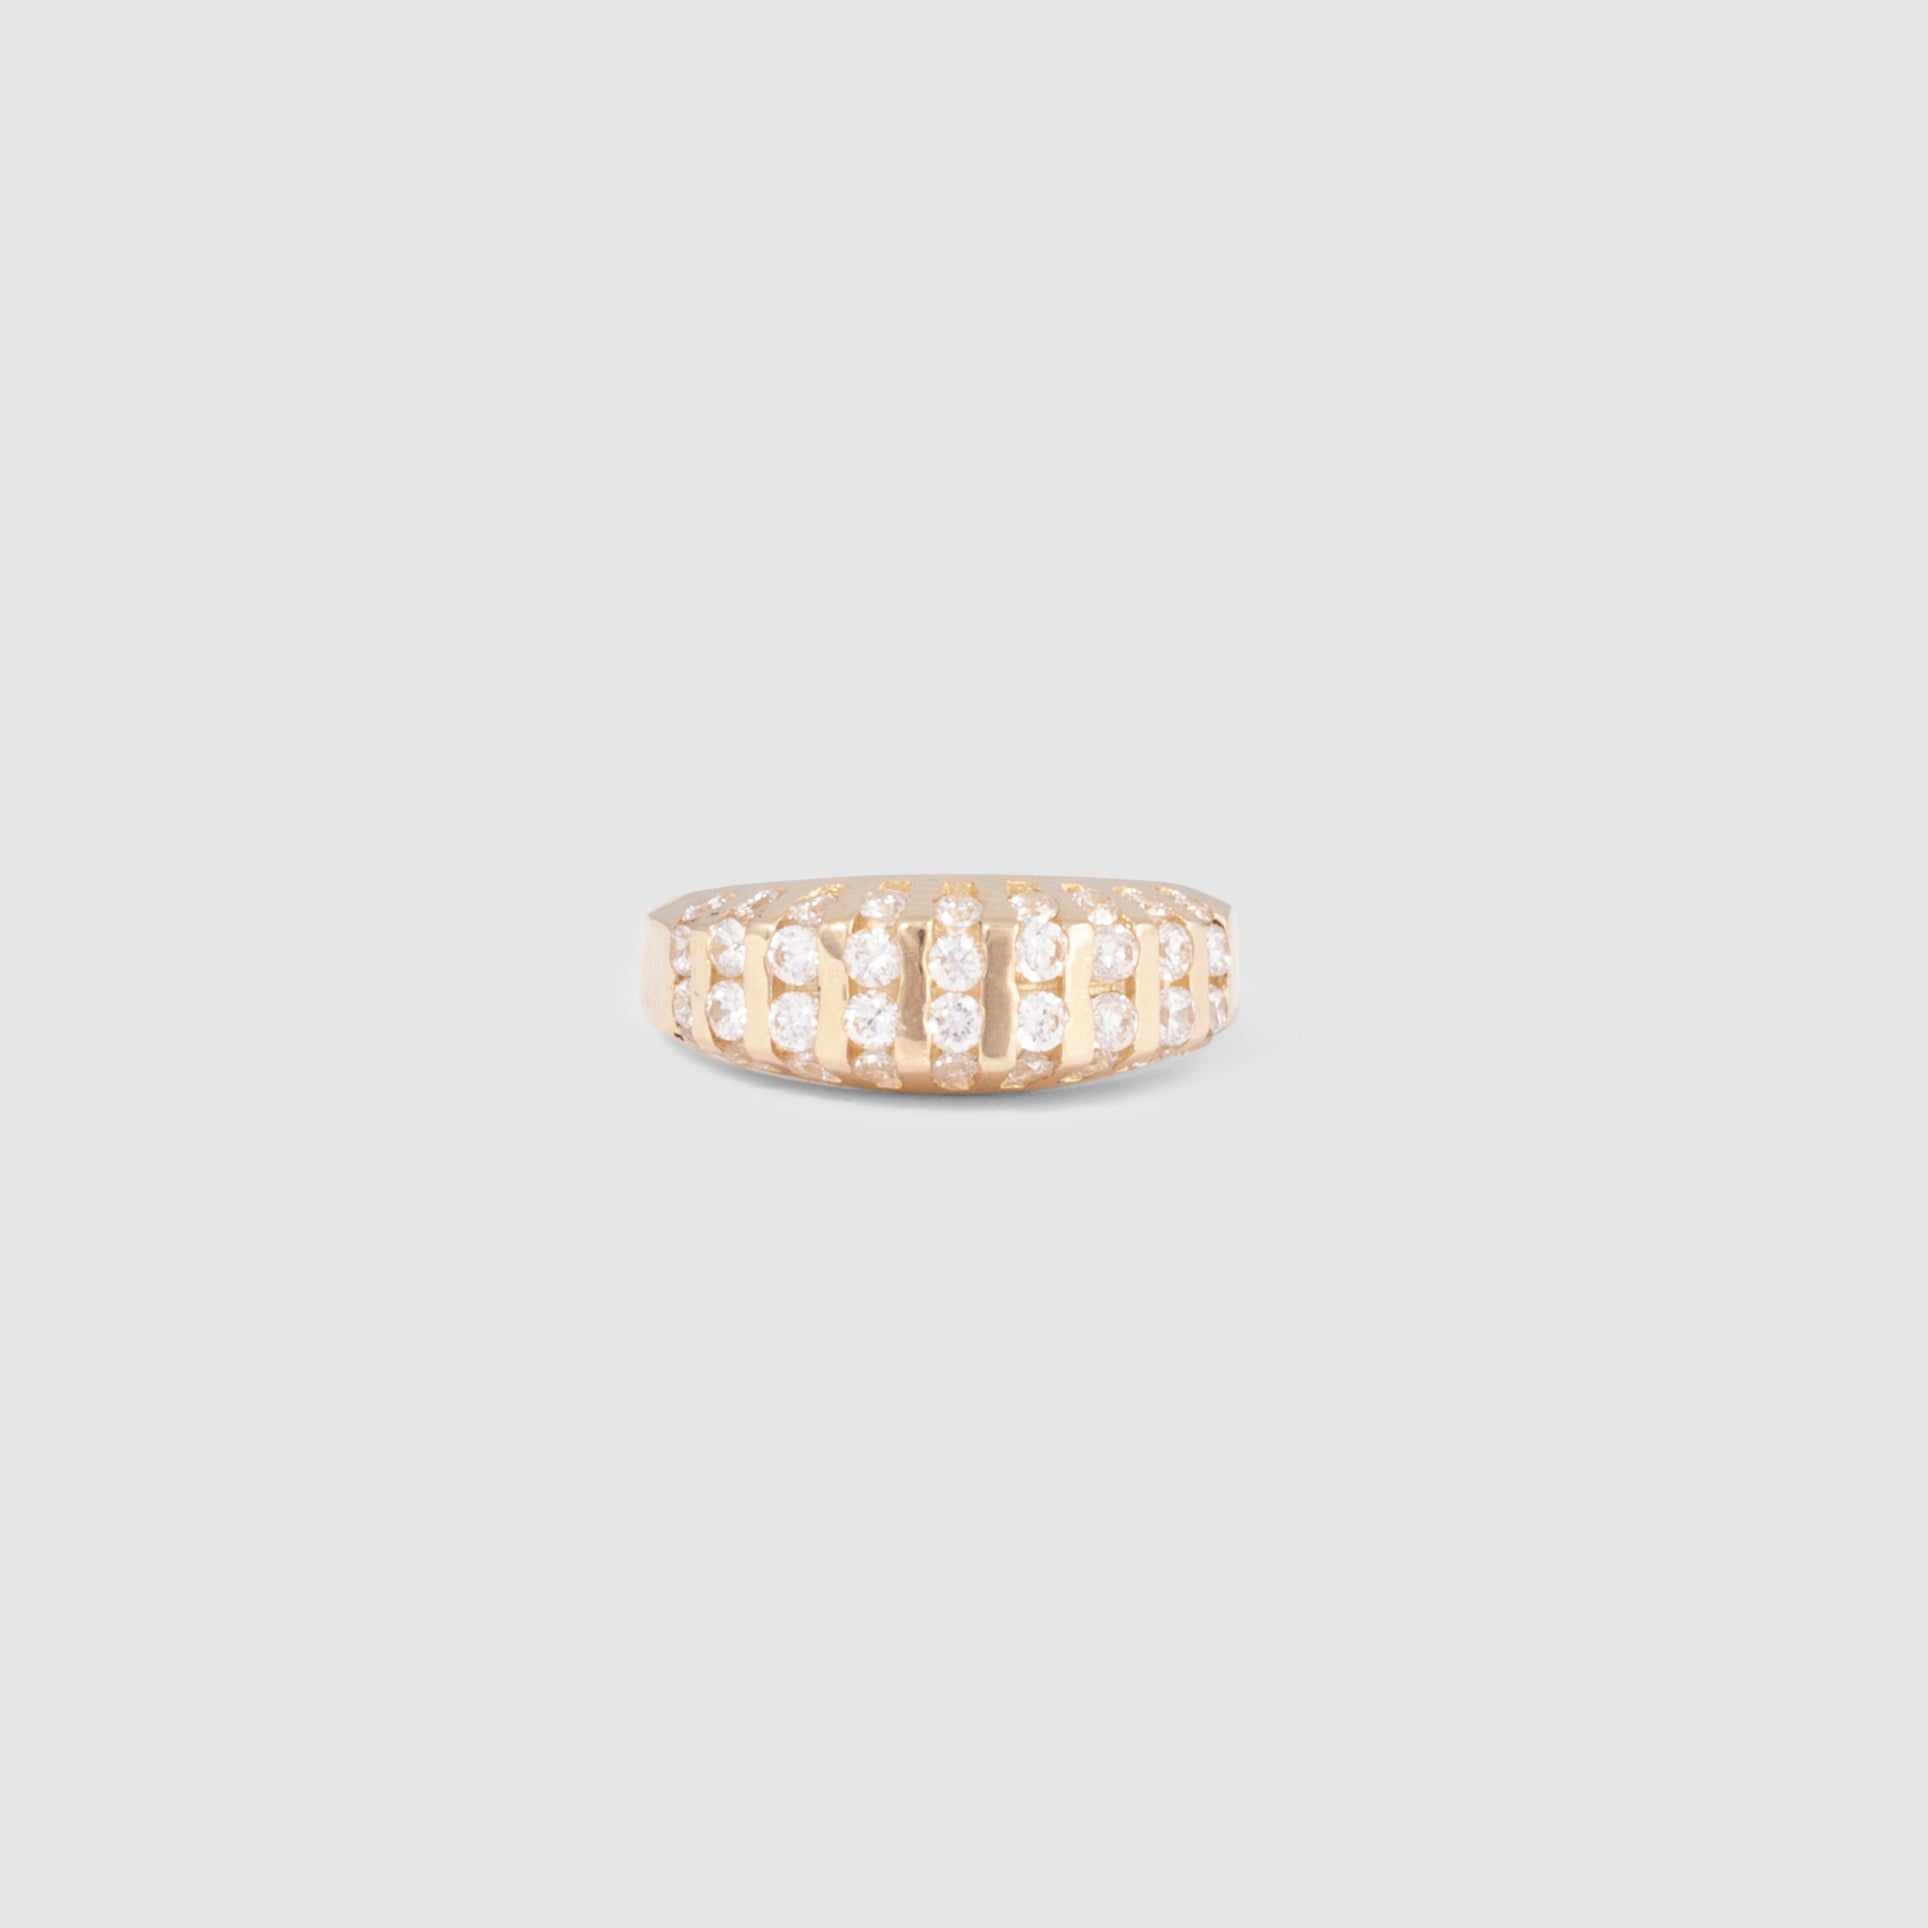 Art Deco style gold ring with CZ stones